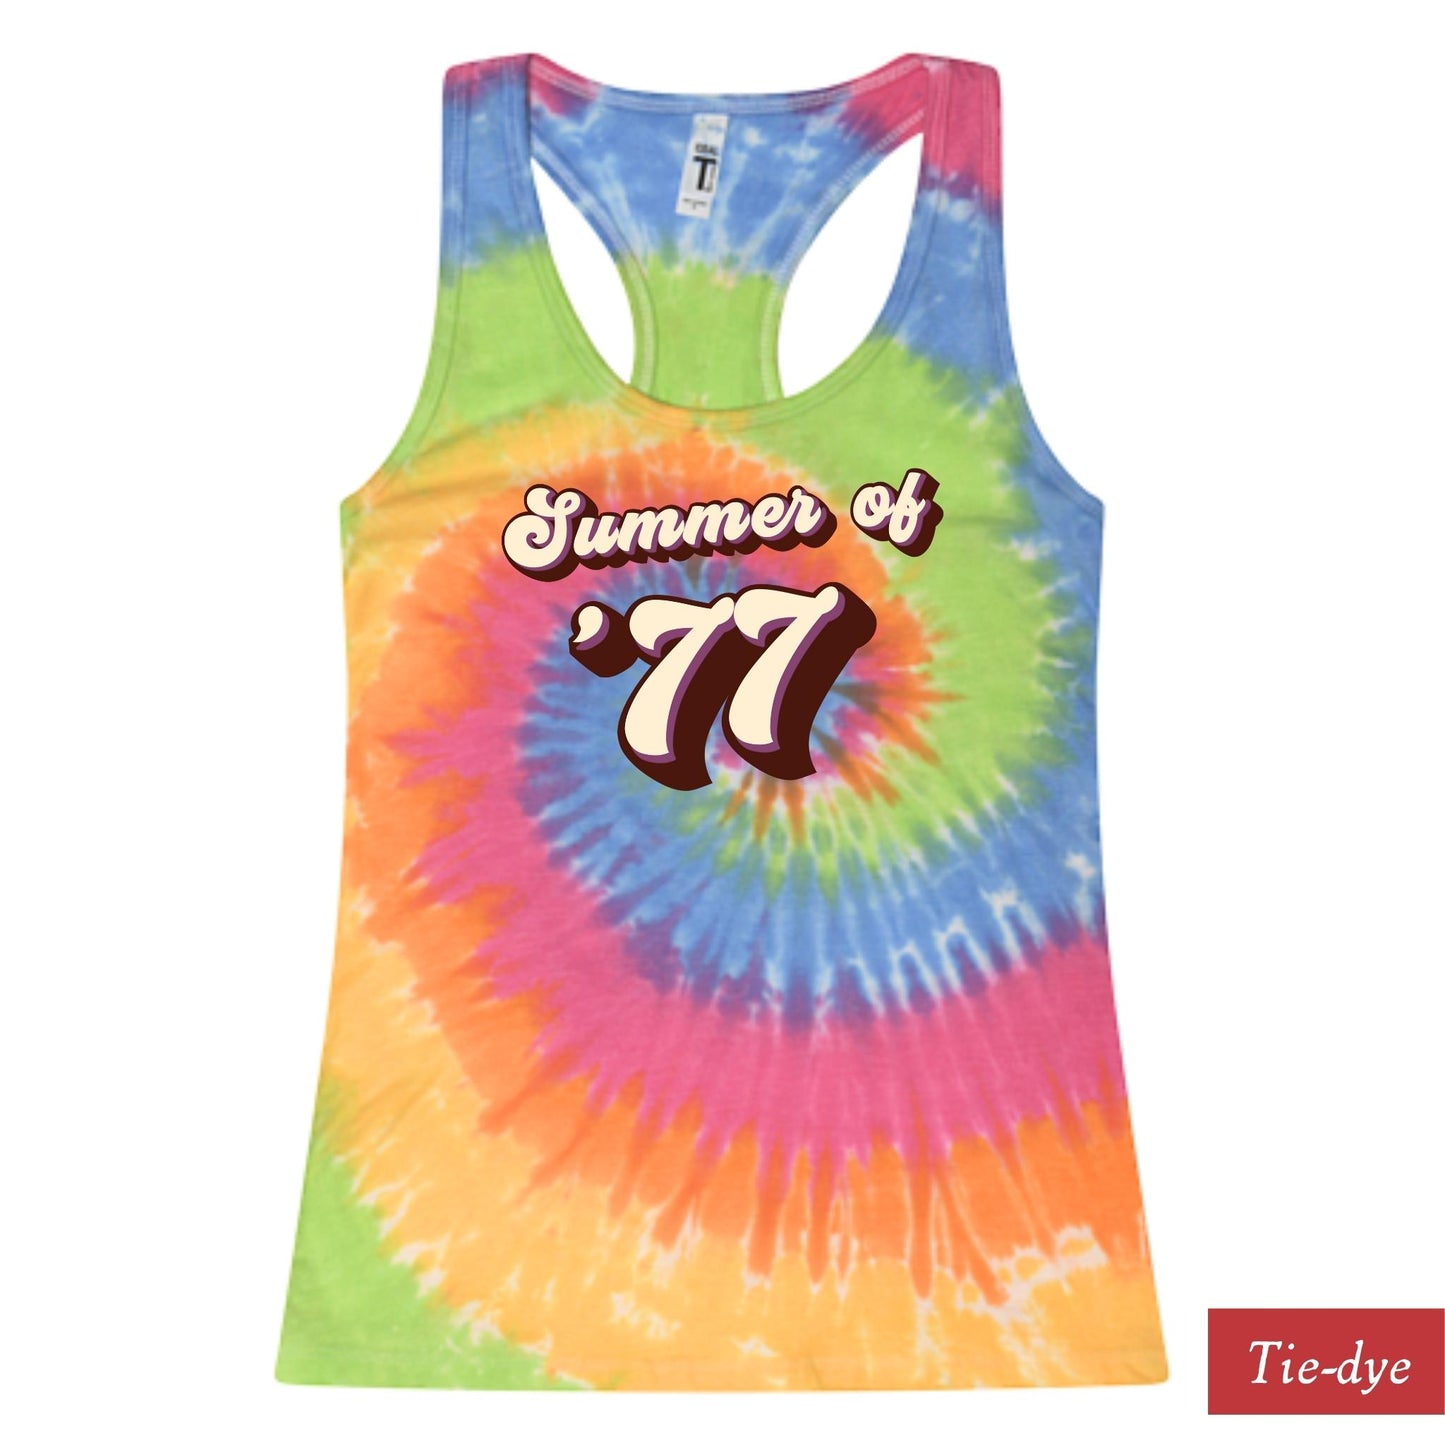 "Summer of '77" Limited Edition Women's Tank Top